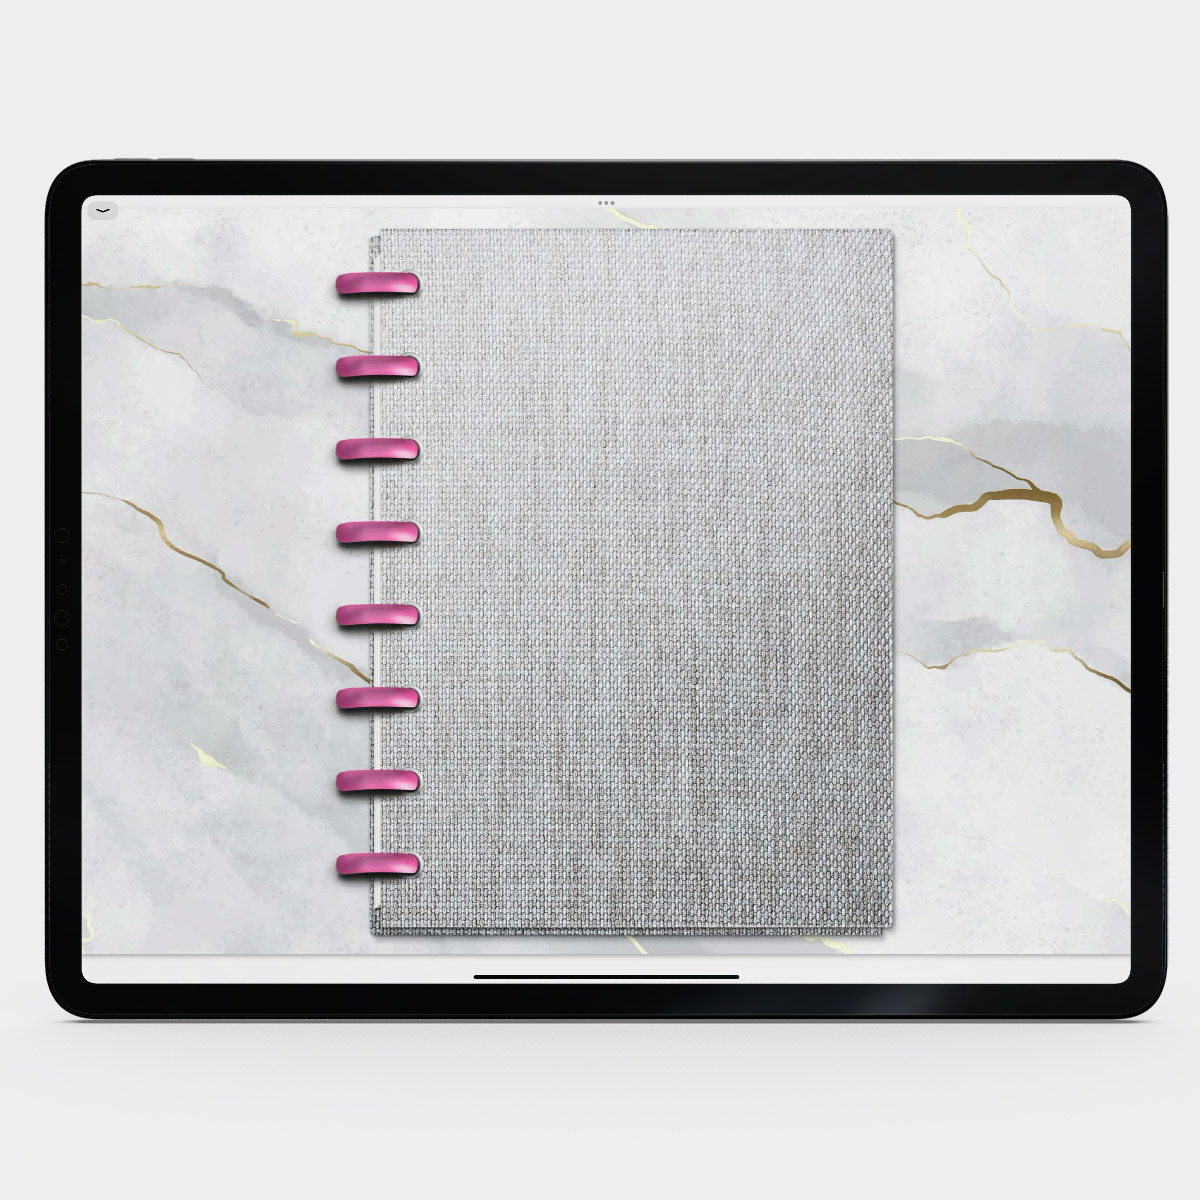 This image shows the free digital planner you can get in this post. It is open to the cover page.